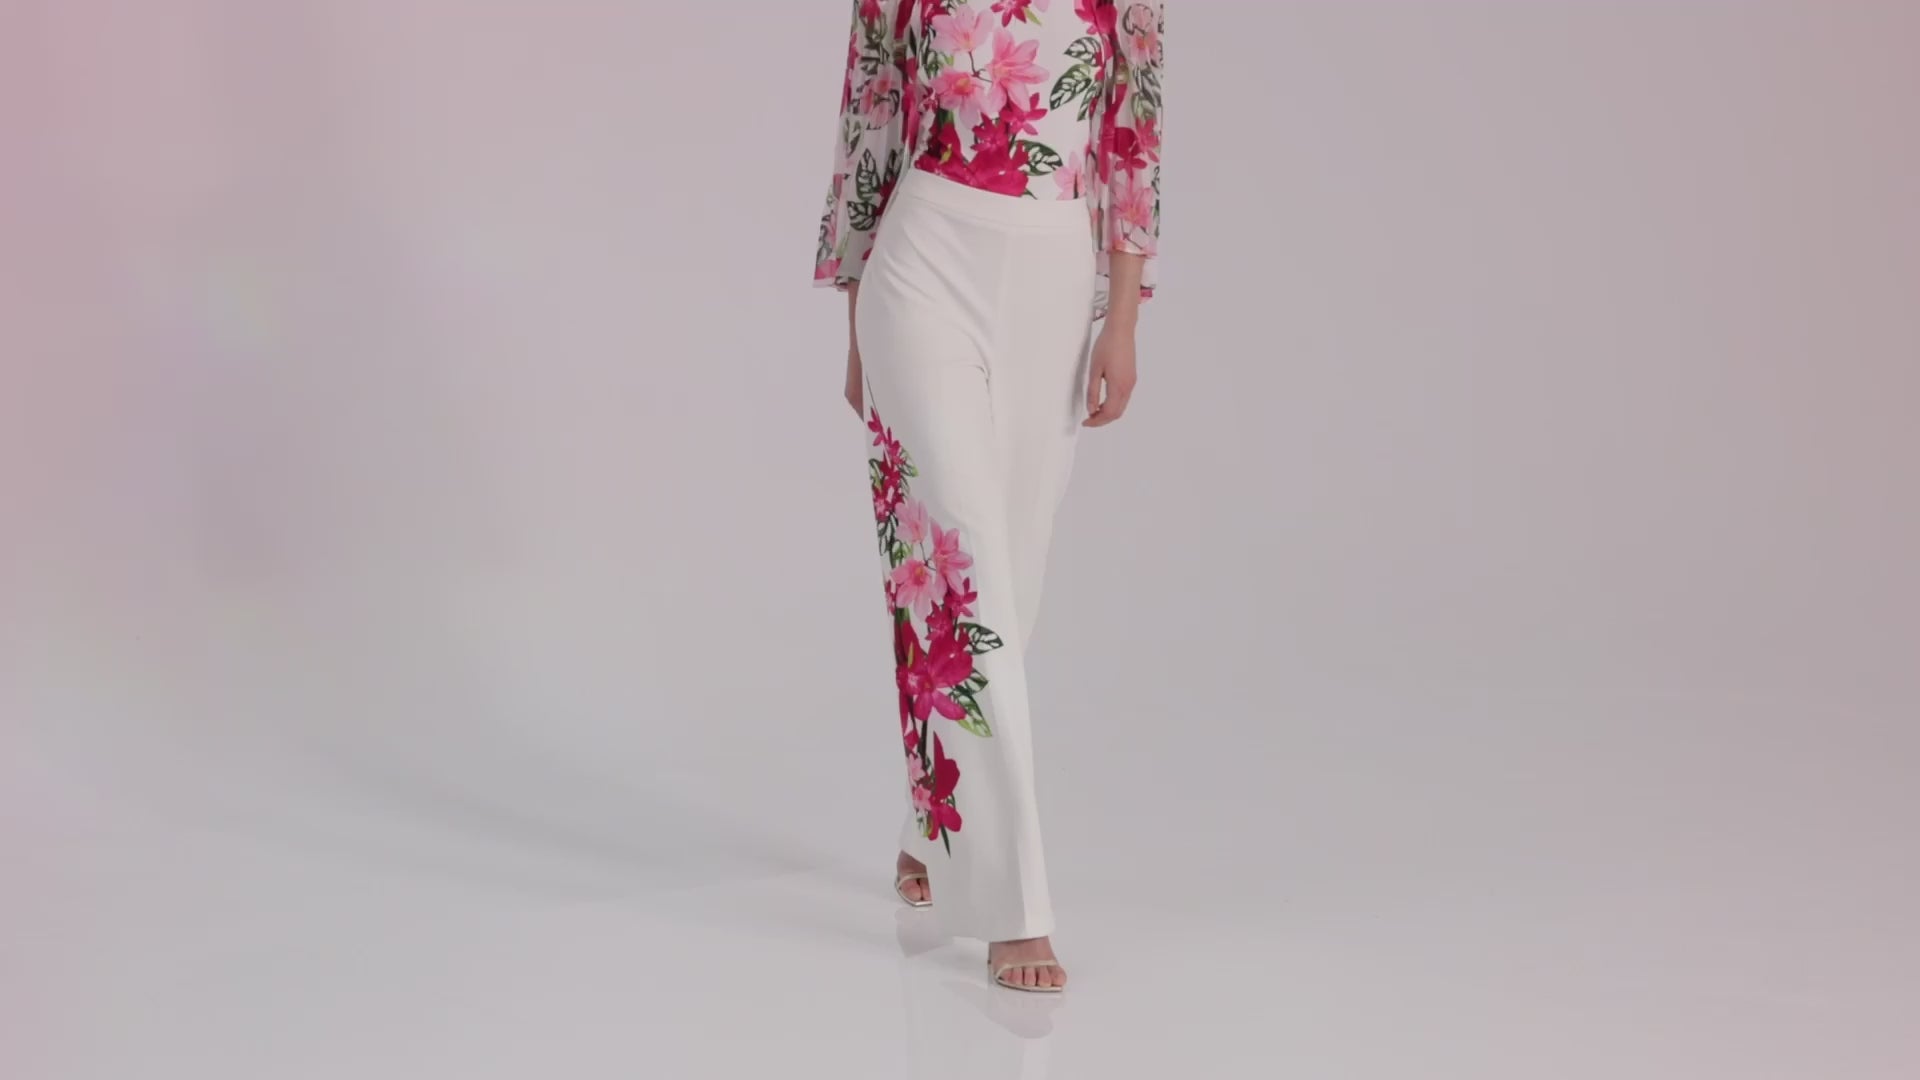 Mary Floral Print Chiffon Off-the-Shoulder Top by Joseph Ribkoff